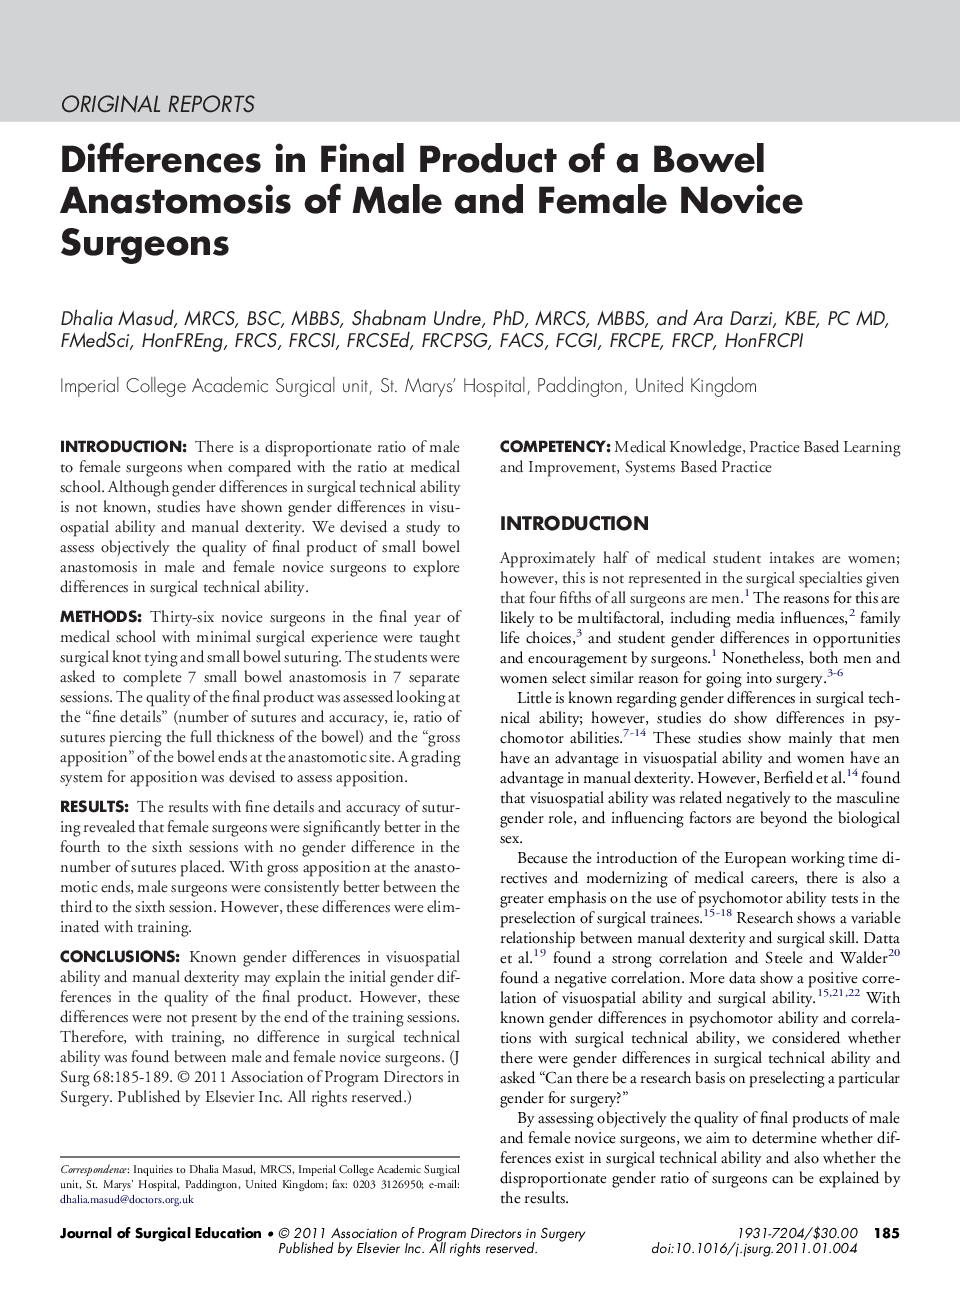 Differences in Final Product of a Bowel Anastomosis of Male and Female Novice Surgeons